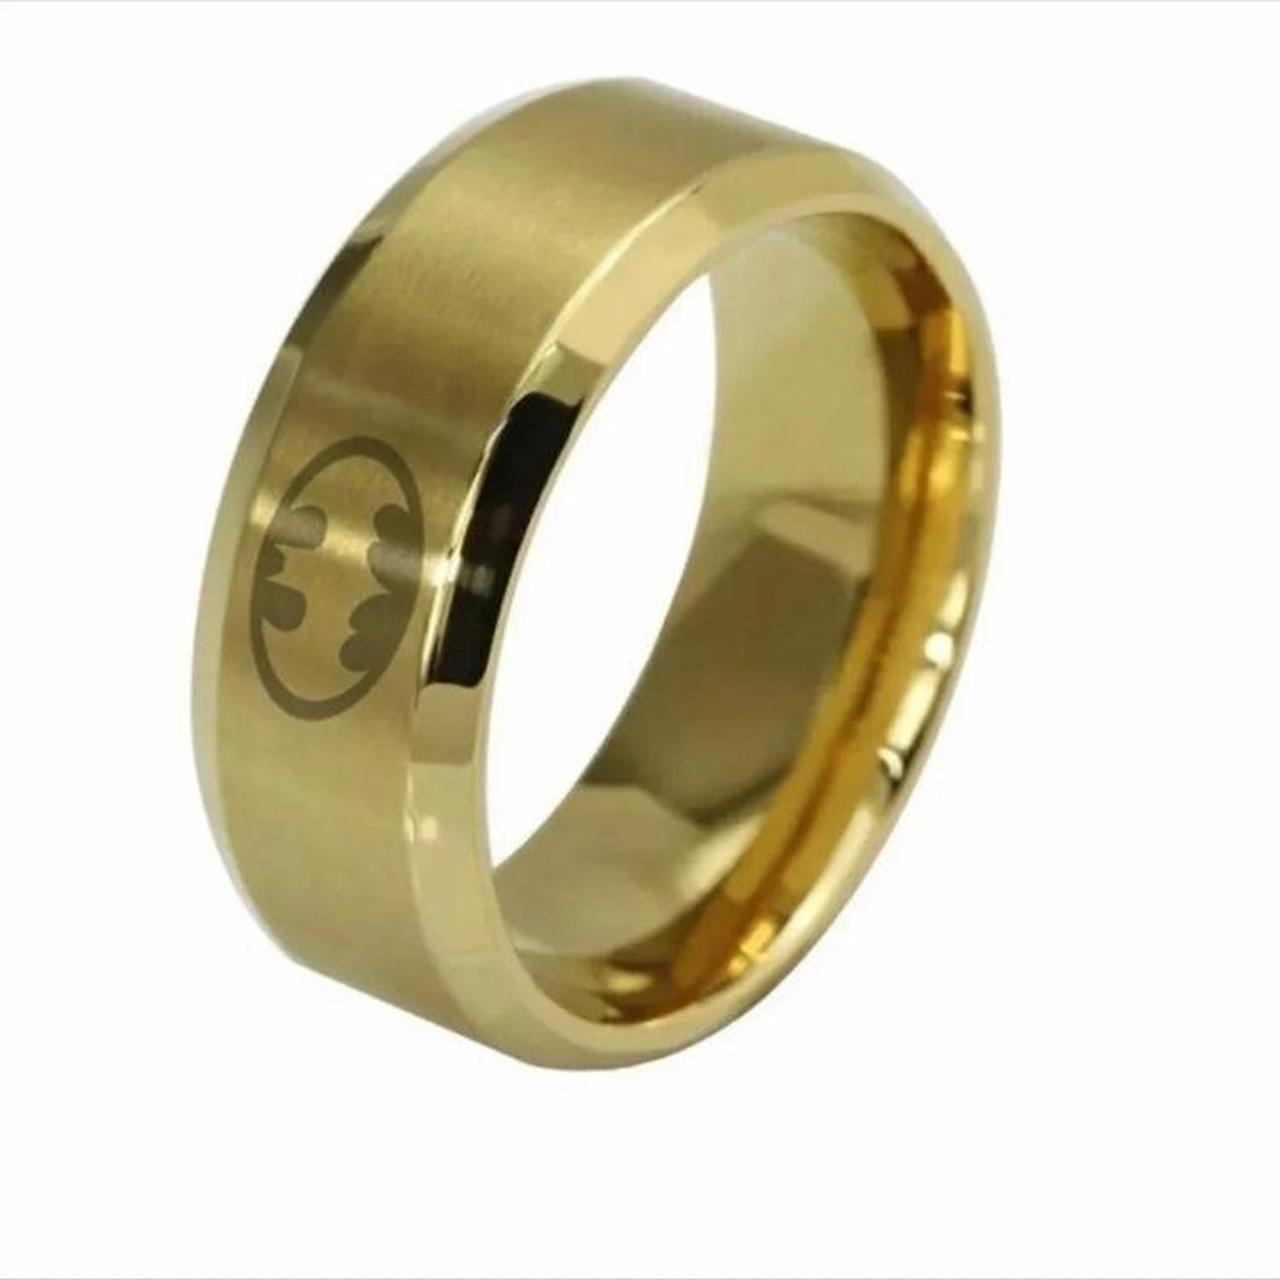 Product Image 2 - 6mm gold batman ring
Condition: 100%